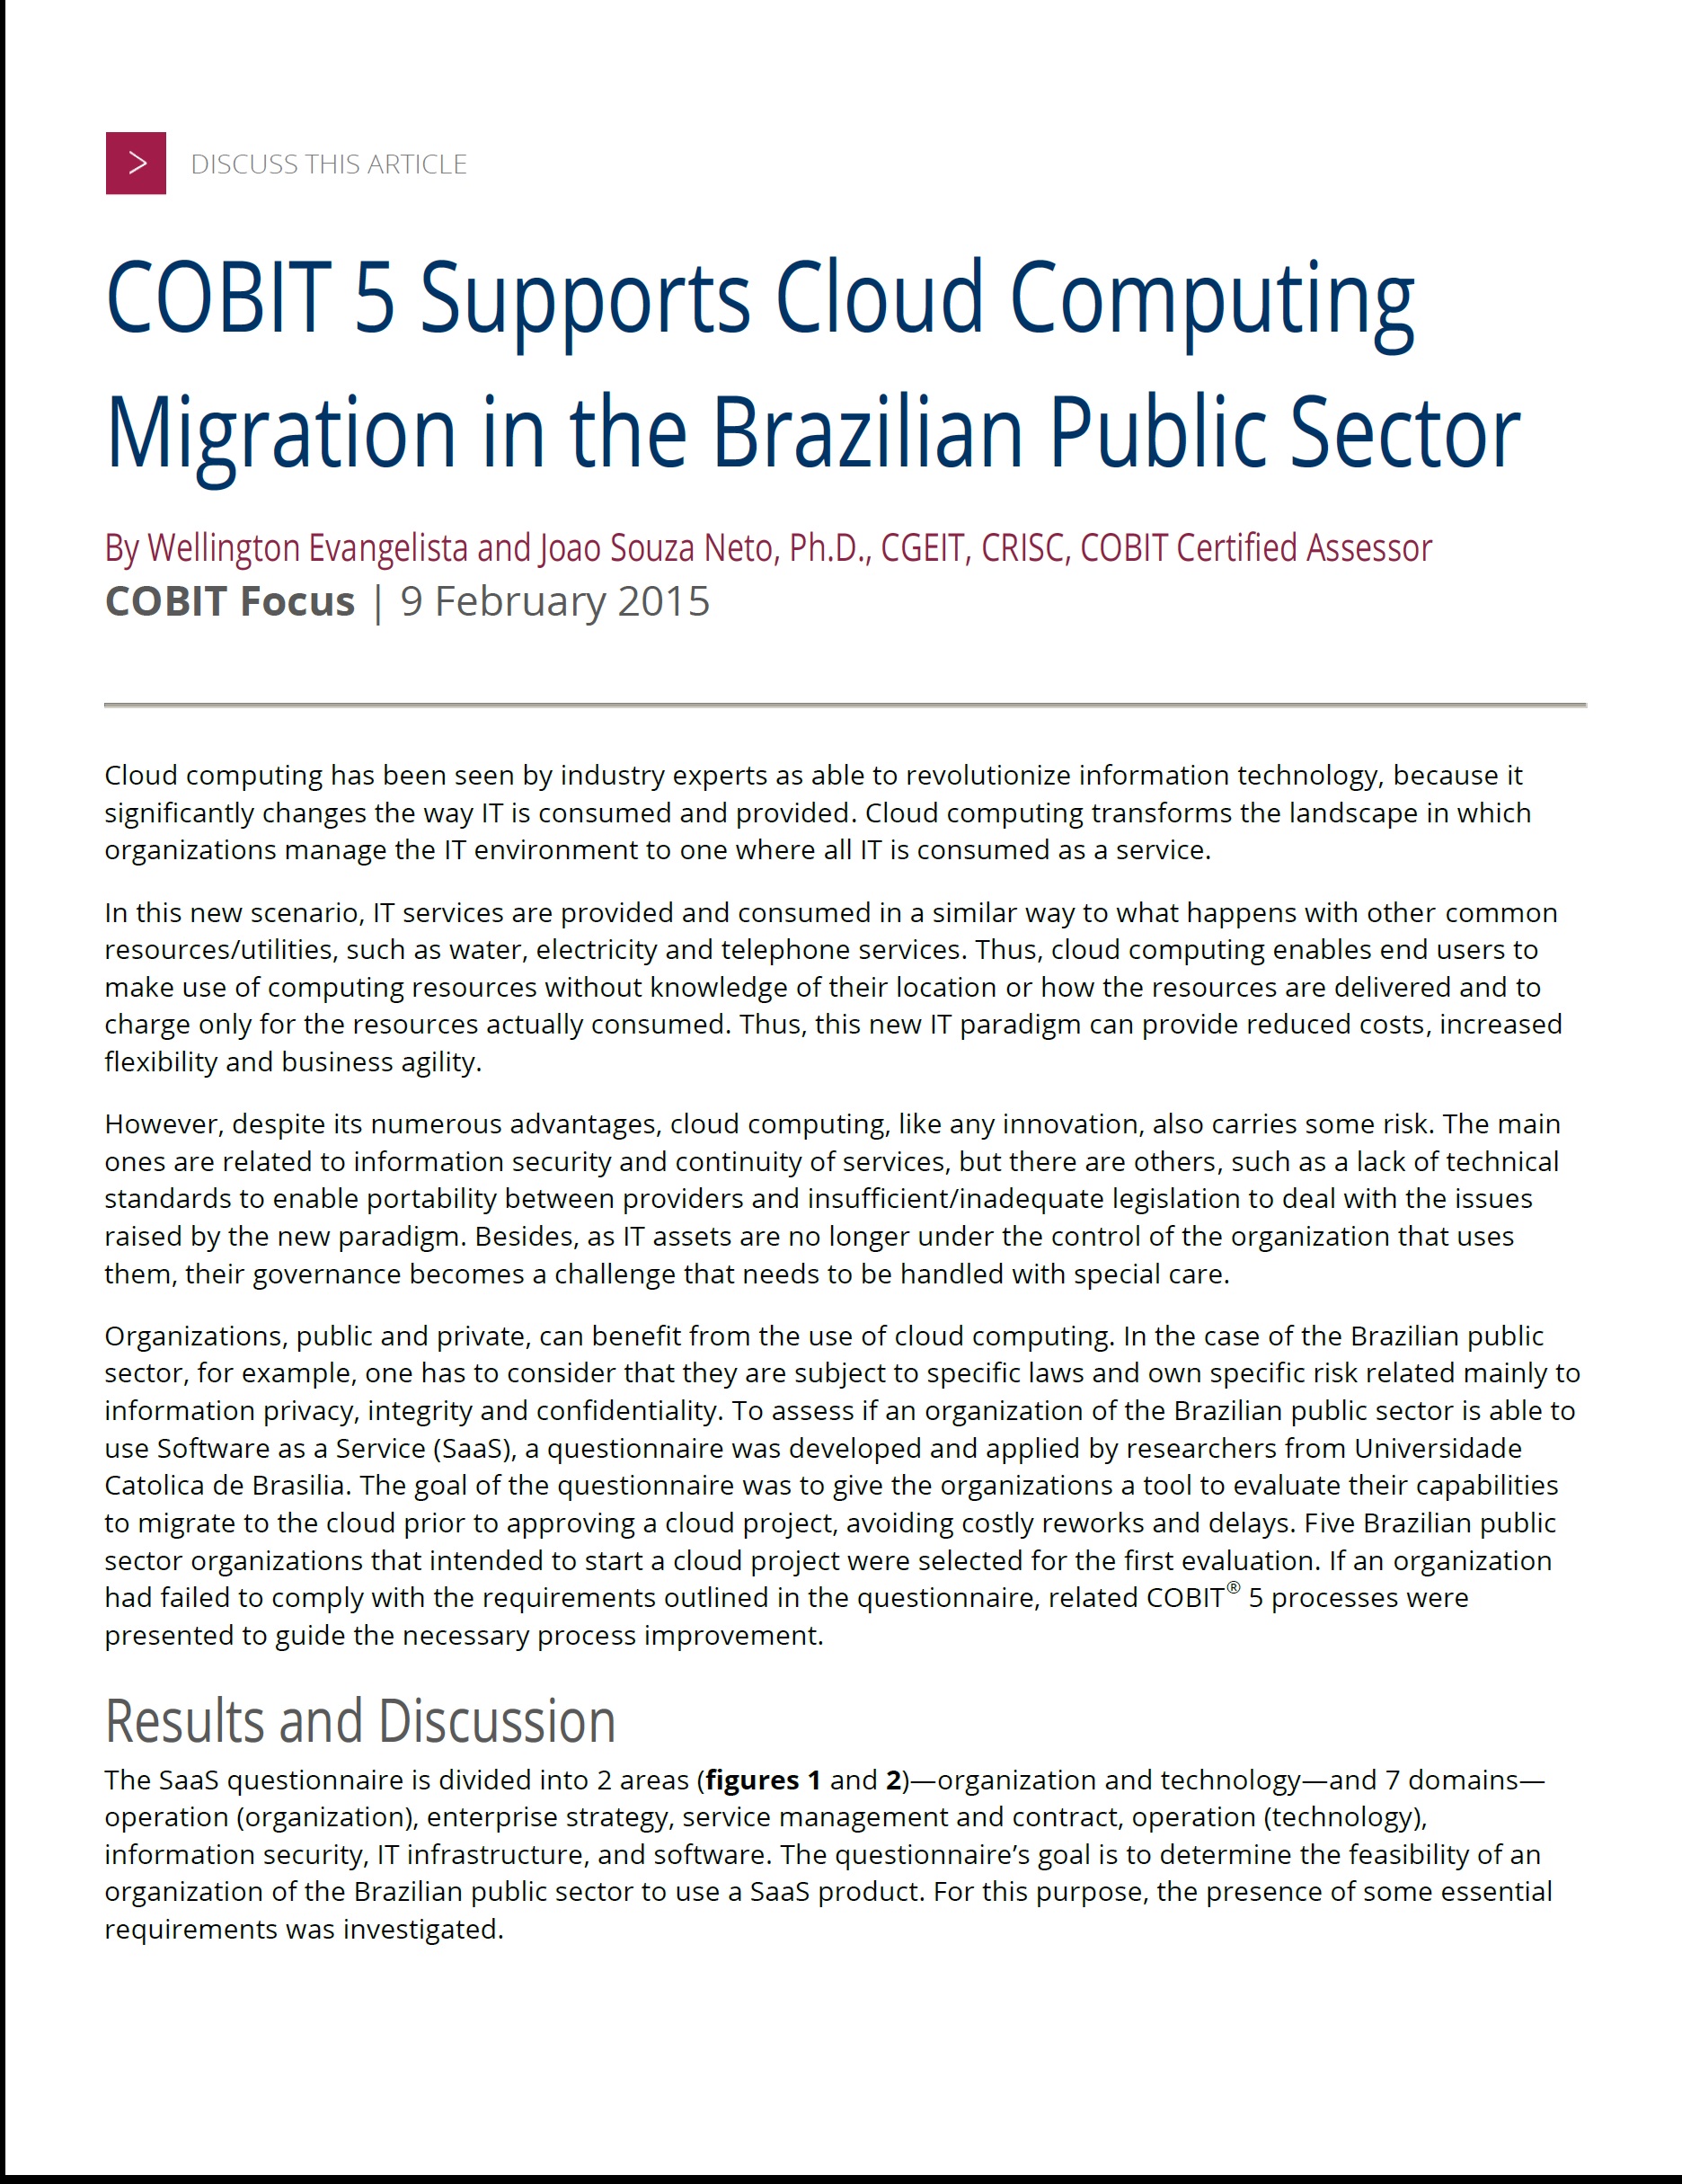 COBIT 5 Supports Cloud Computing Migration in the Brazilian Public Sector